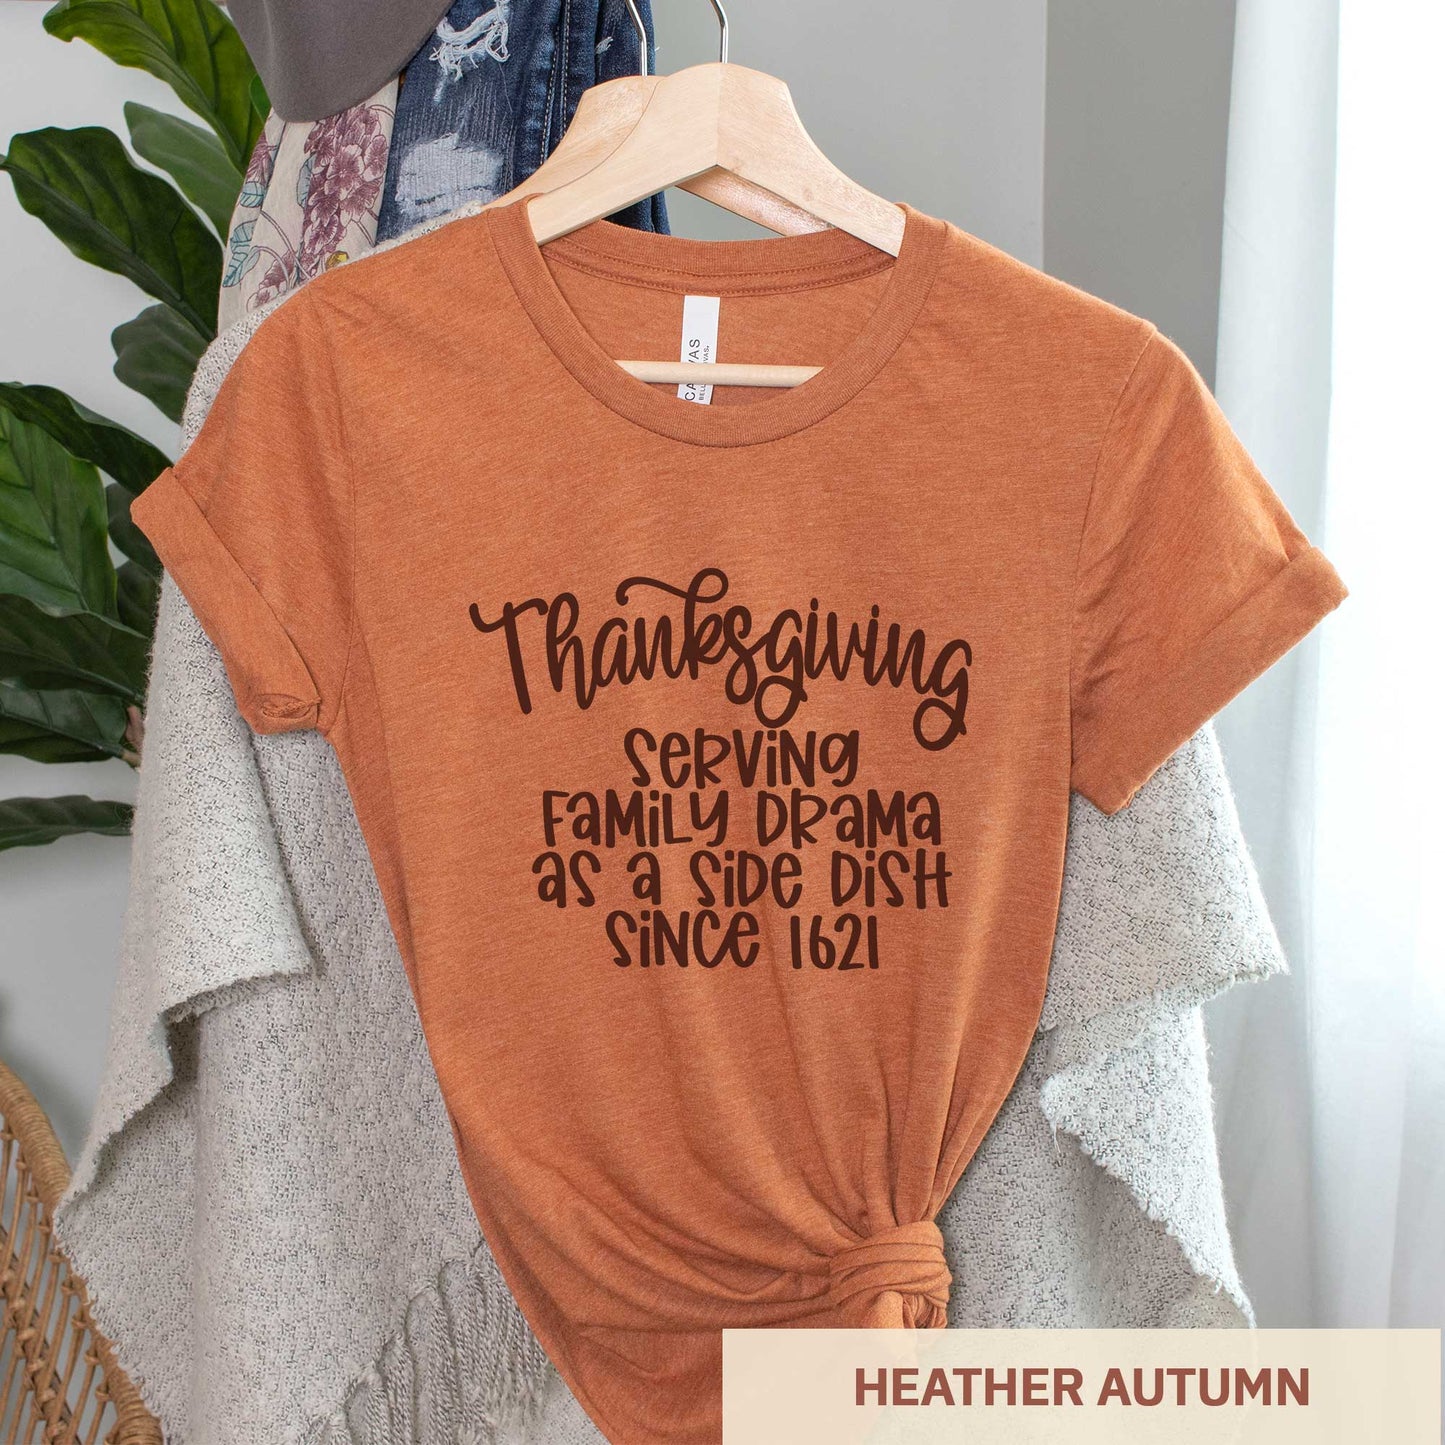 A hanging heather autumn Bella Canvas t-shirt featuring the words thanksgiving serving family as a side dish since 1621.